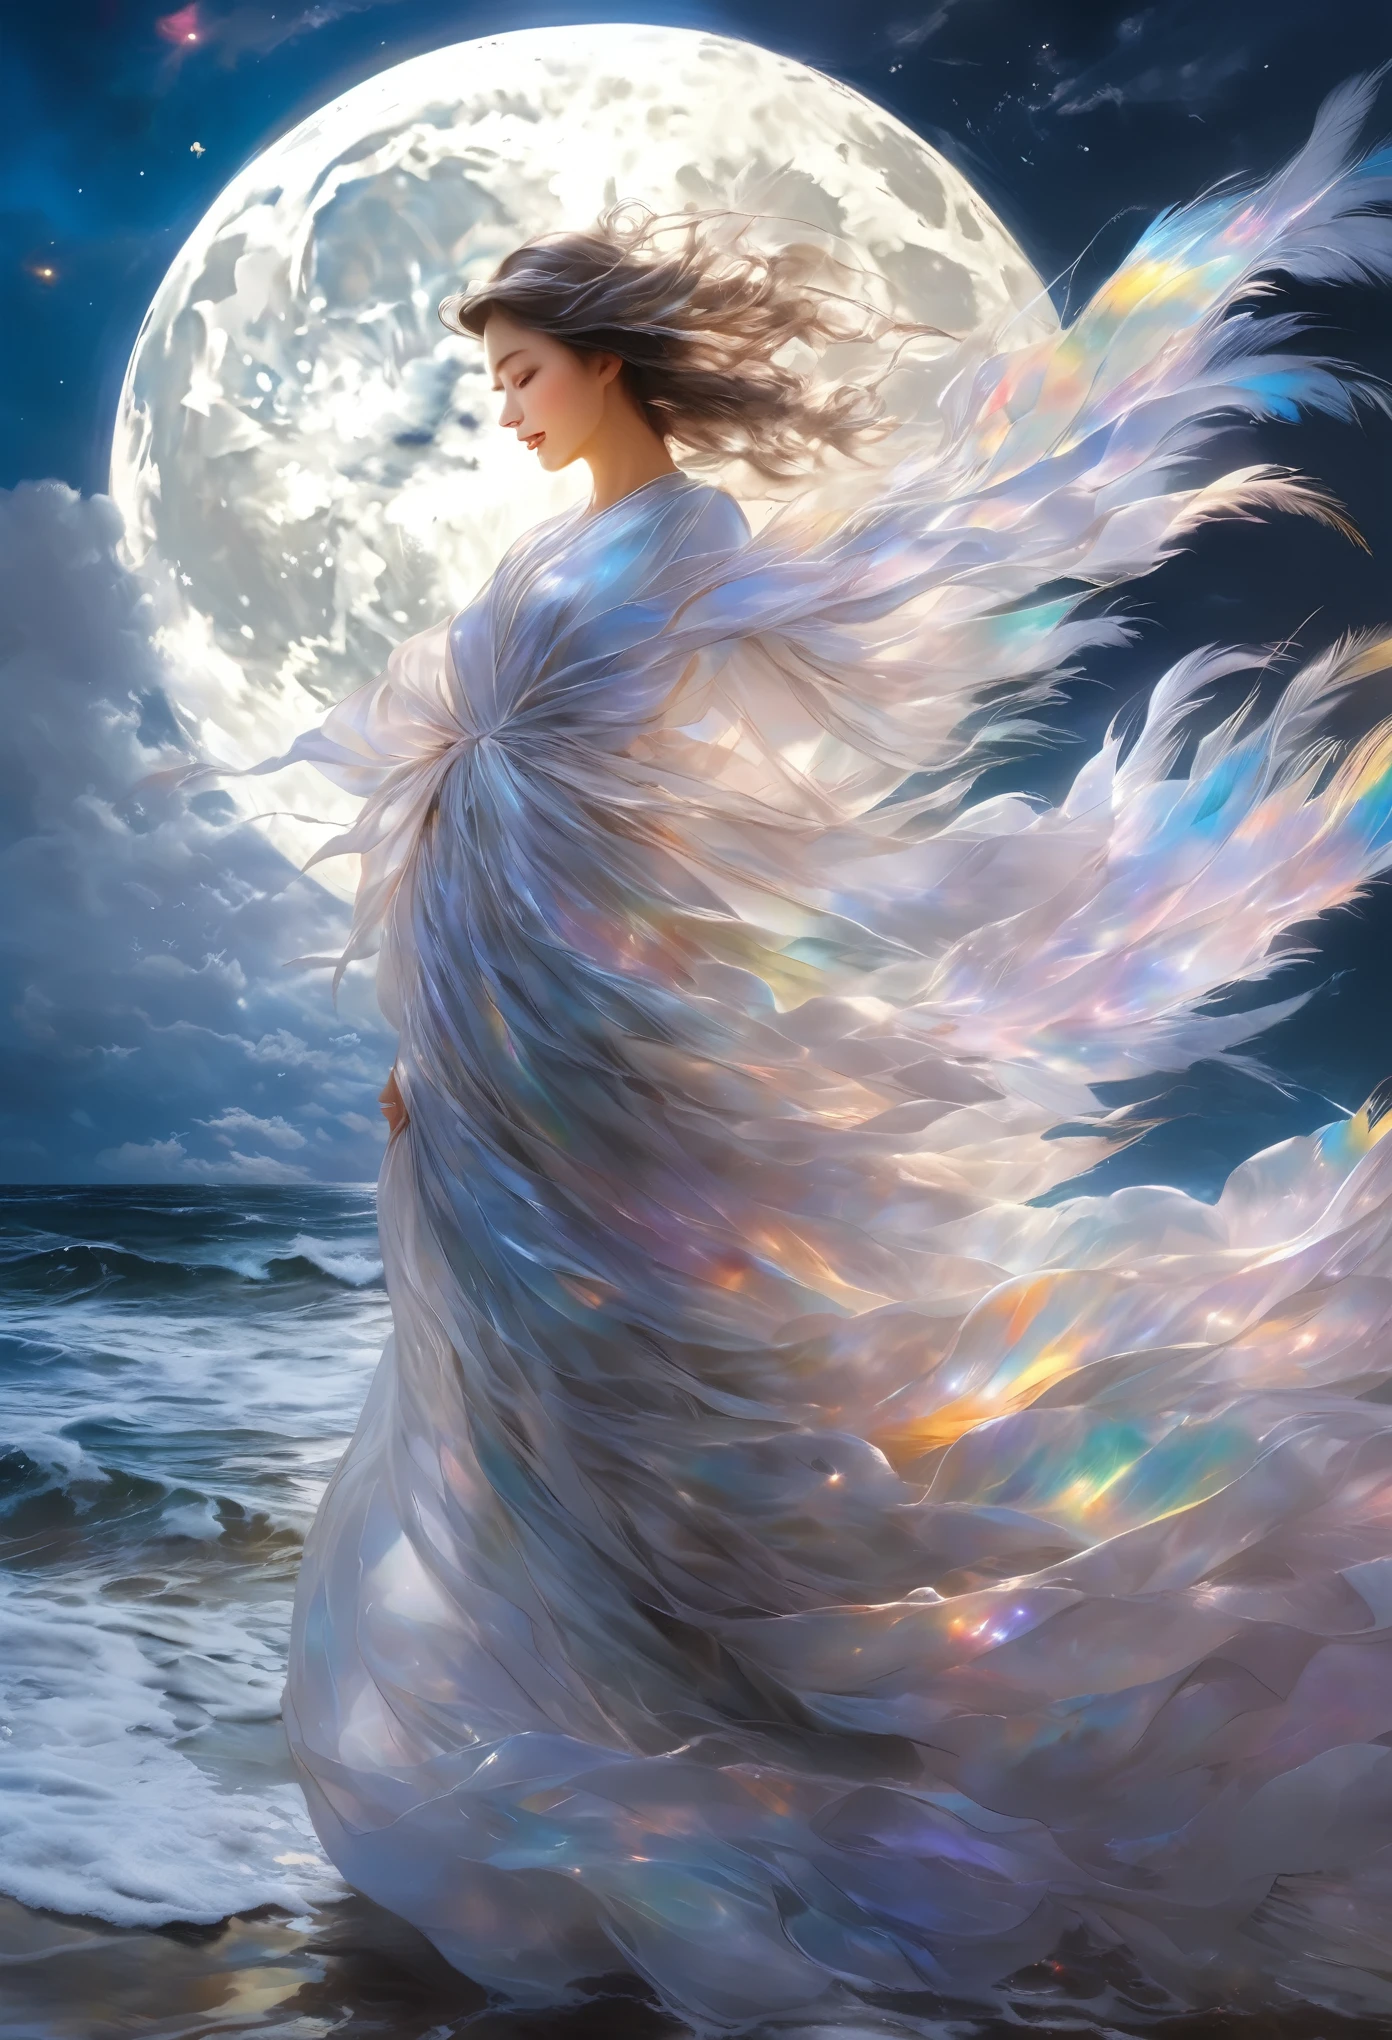 best quality, super fine, 16k, masterpiece, RAW photo, photorealistic, A three-dimensional depiction of undulating oil paintings, fusion of watercolors and oil paintings, combination of monochrome and color, the ocean and the galaxy universe in the big full moon during the day, the transparent translucent iridescent feather robe of heavenly maiden perched in the air and fluttering in the wind, wind, wind-effects, outstanding image effects, wonderful work of art